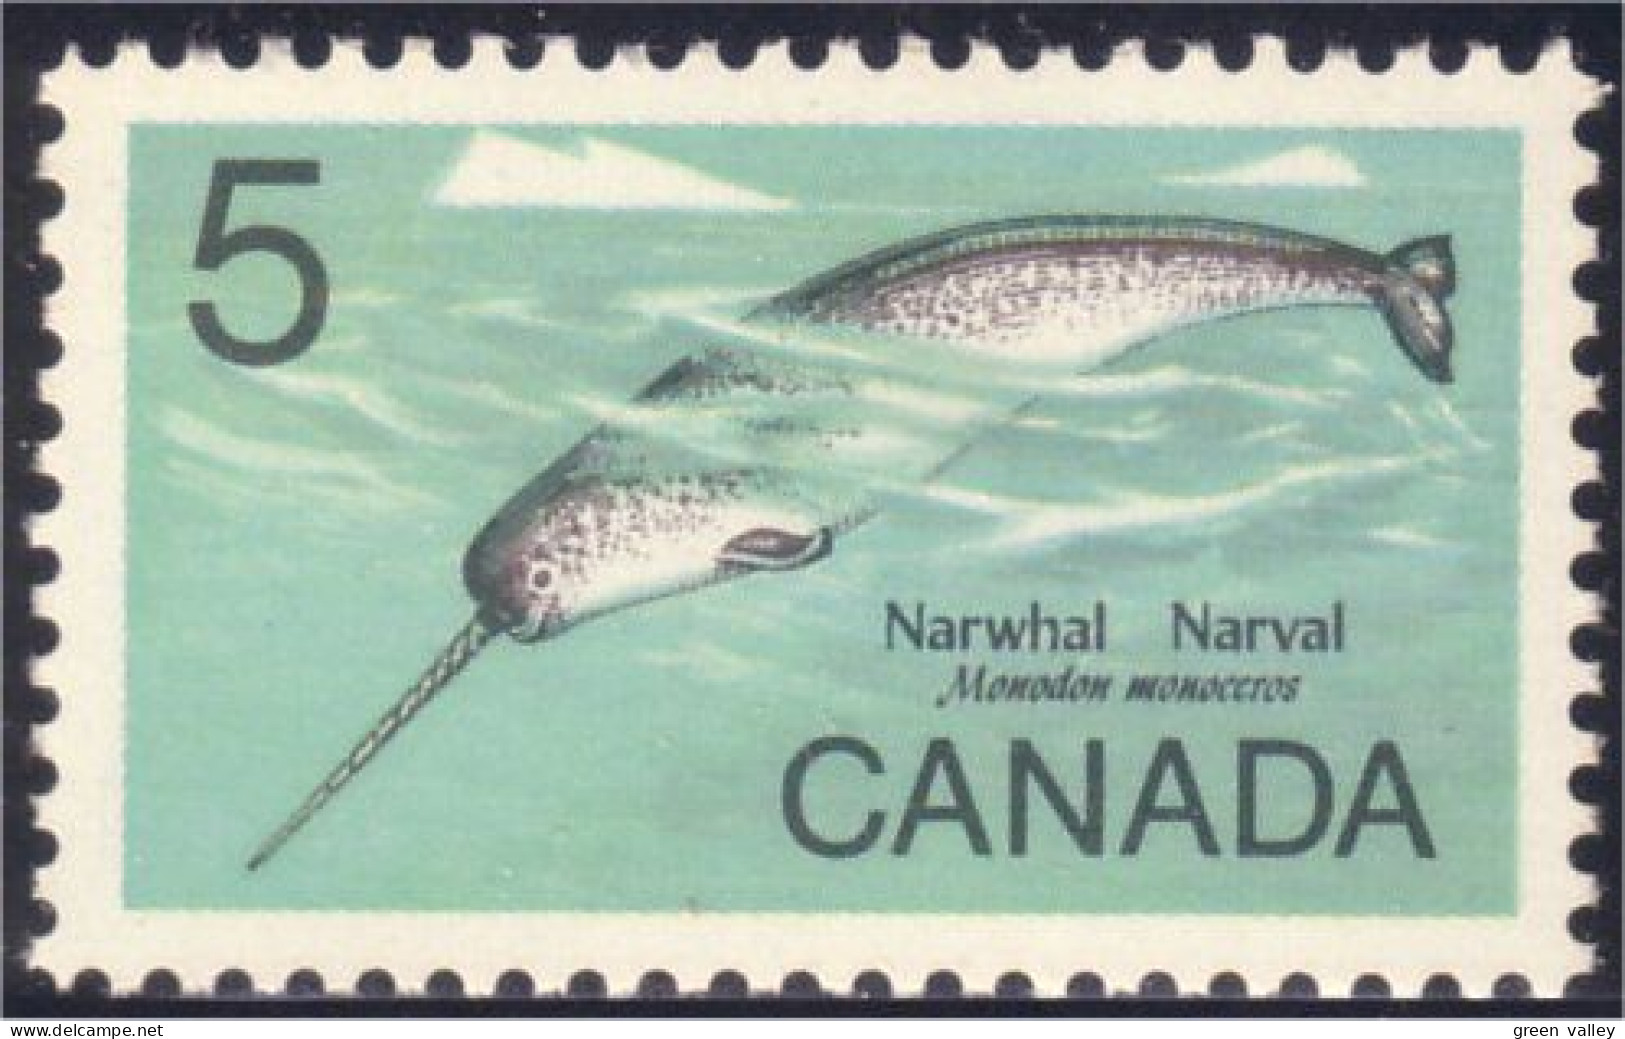 Canada Narwhal Rostre Narval Narwhal Fluorescent MNH ** Neuf SC (04-80iid) - Mineralien